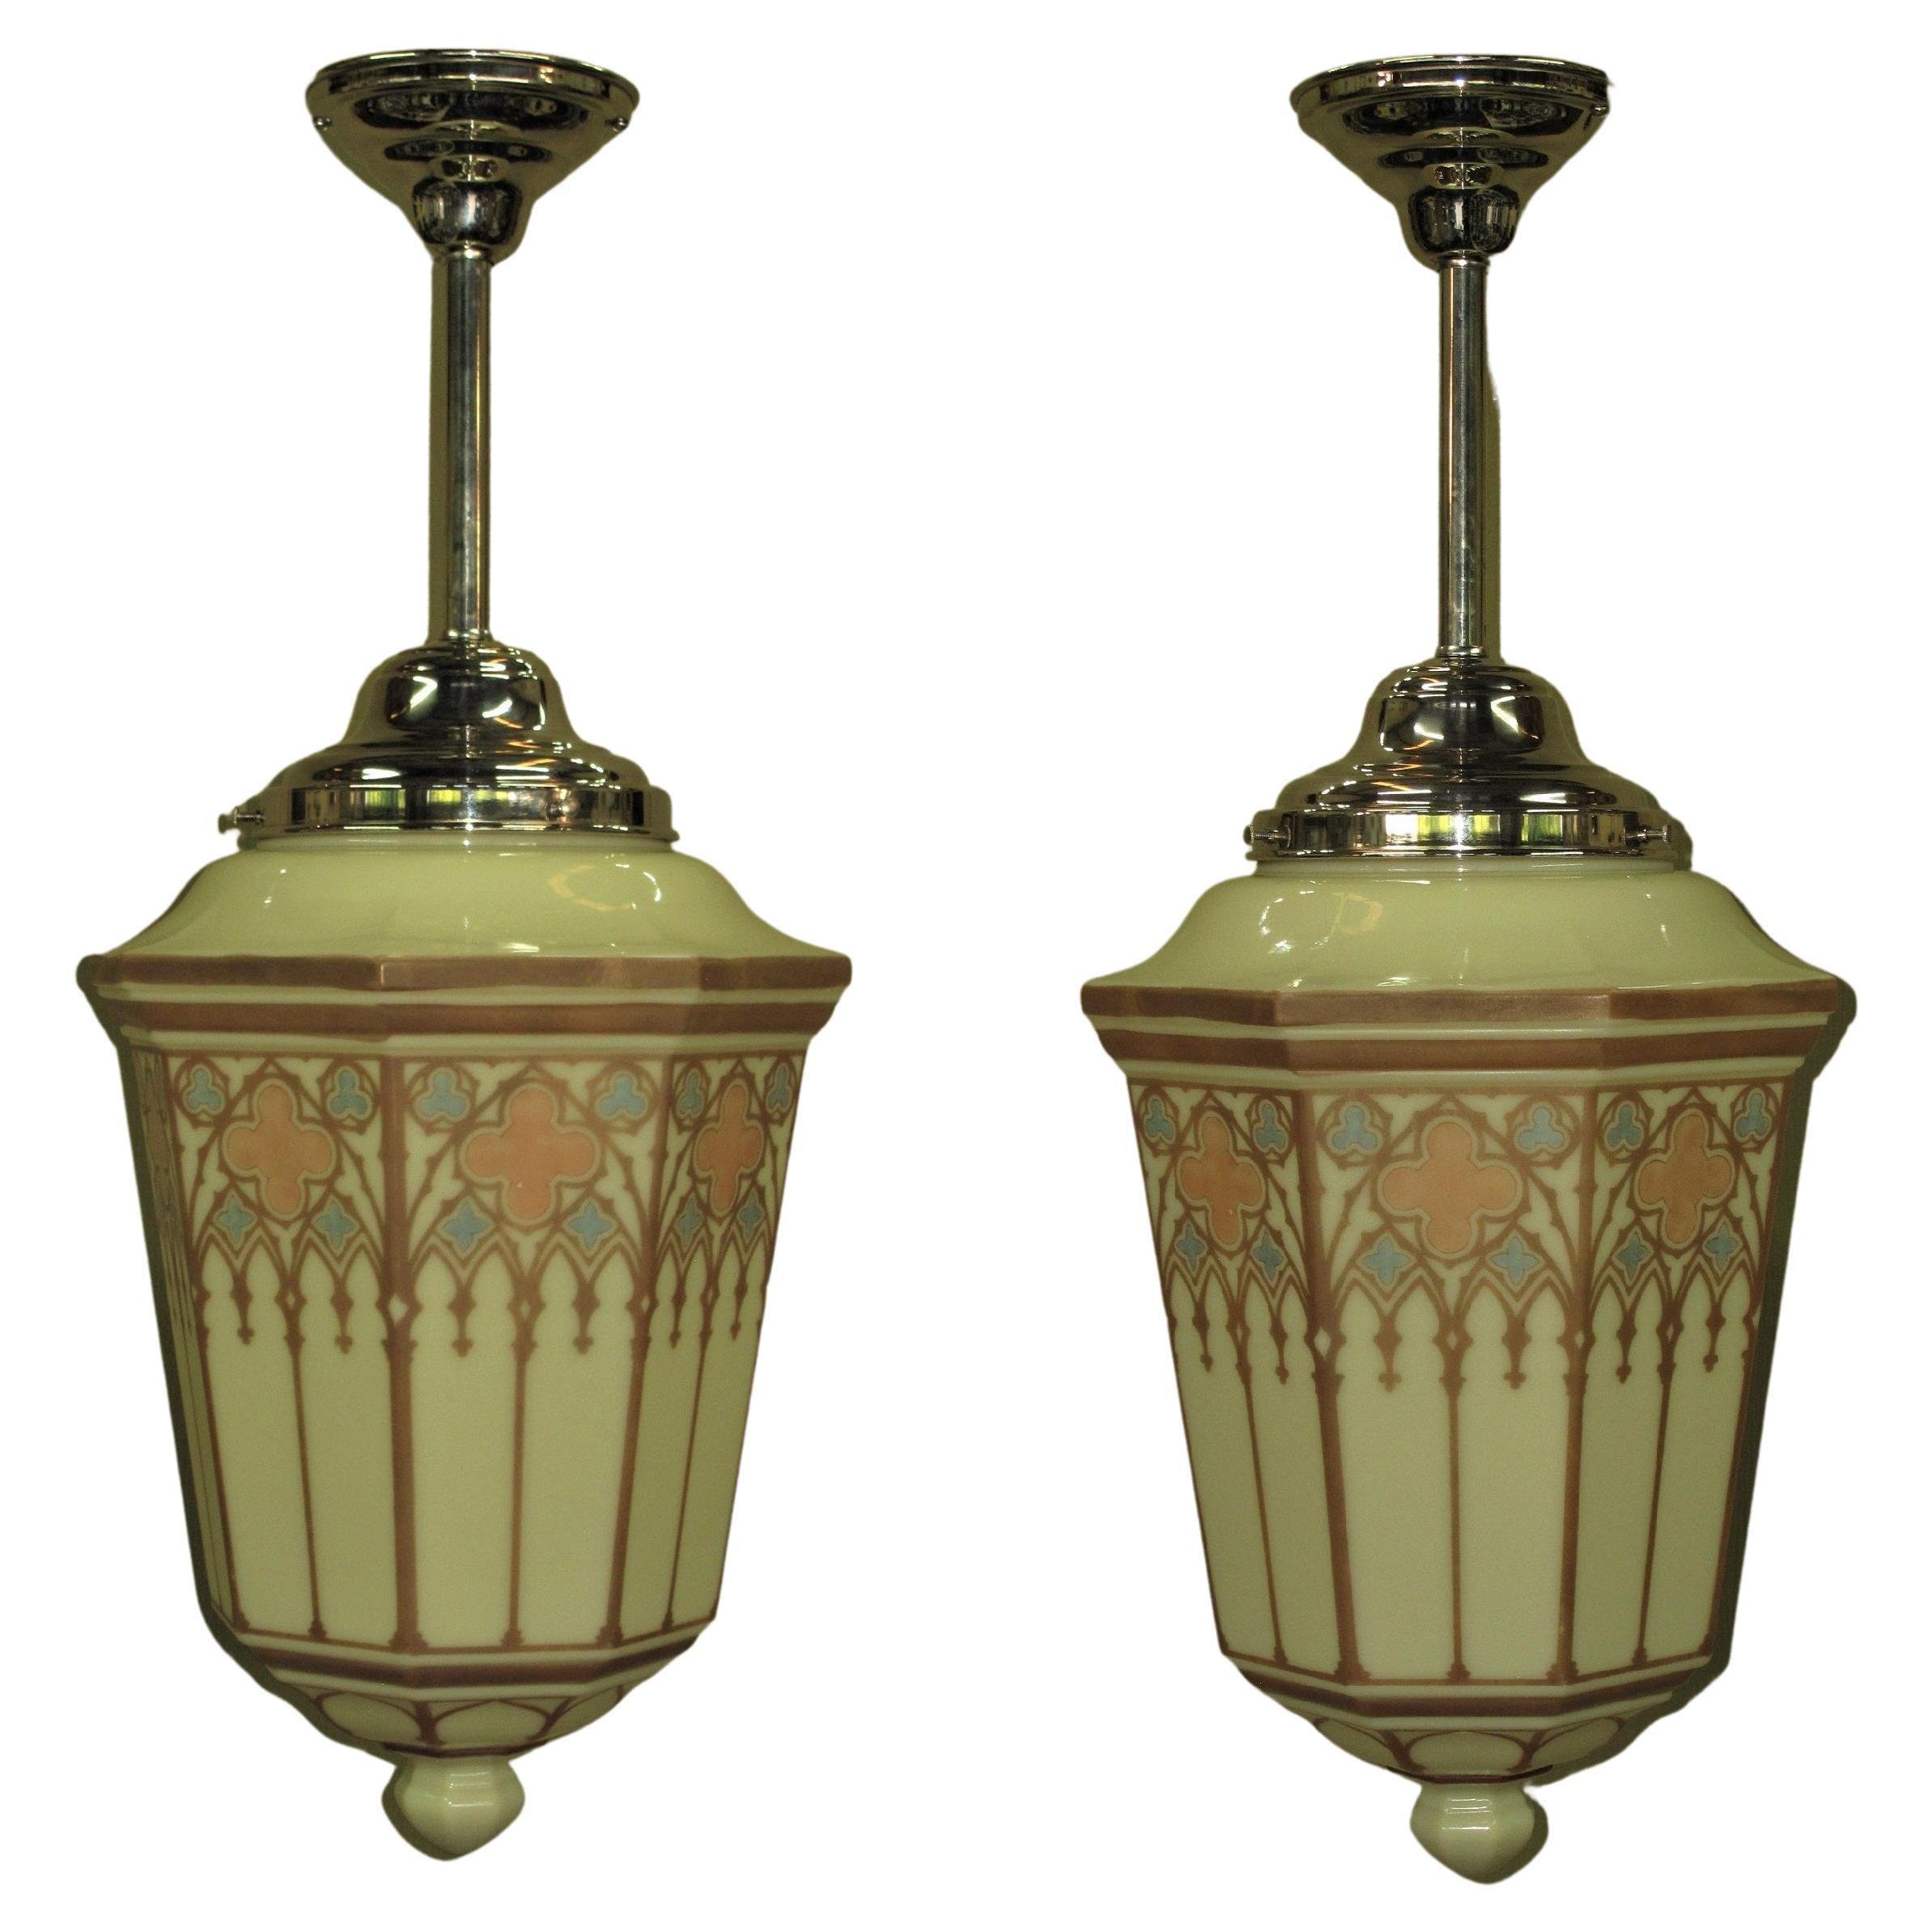 Single only available.  Price is for one ceiling fixture.
Large, colorful, and very attractive 1930's (possibly 20's) Art Deco designed church fixtures with new painted fitters. The custard glass globes have patterns in tan, light blue, and a light